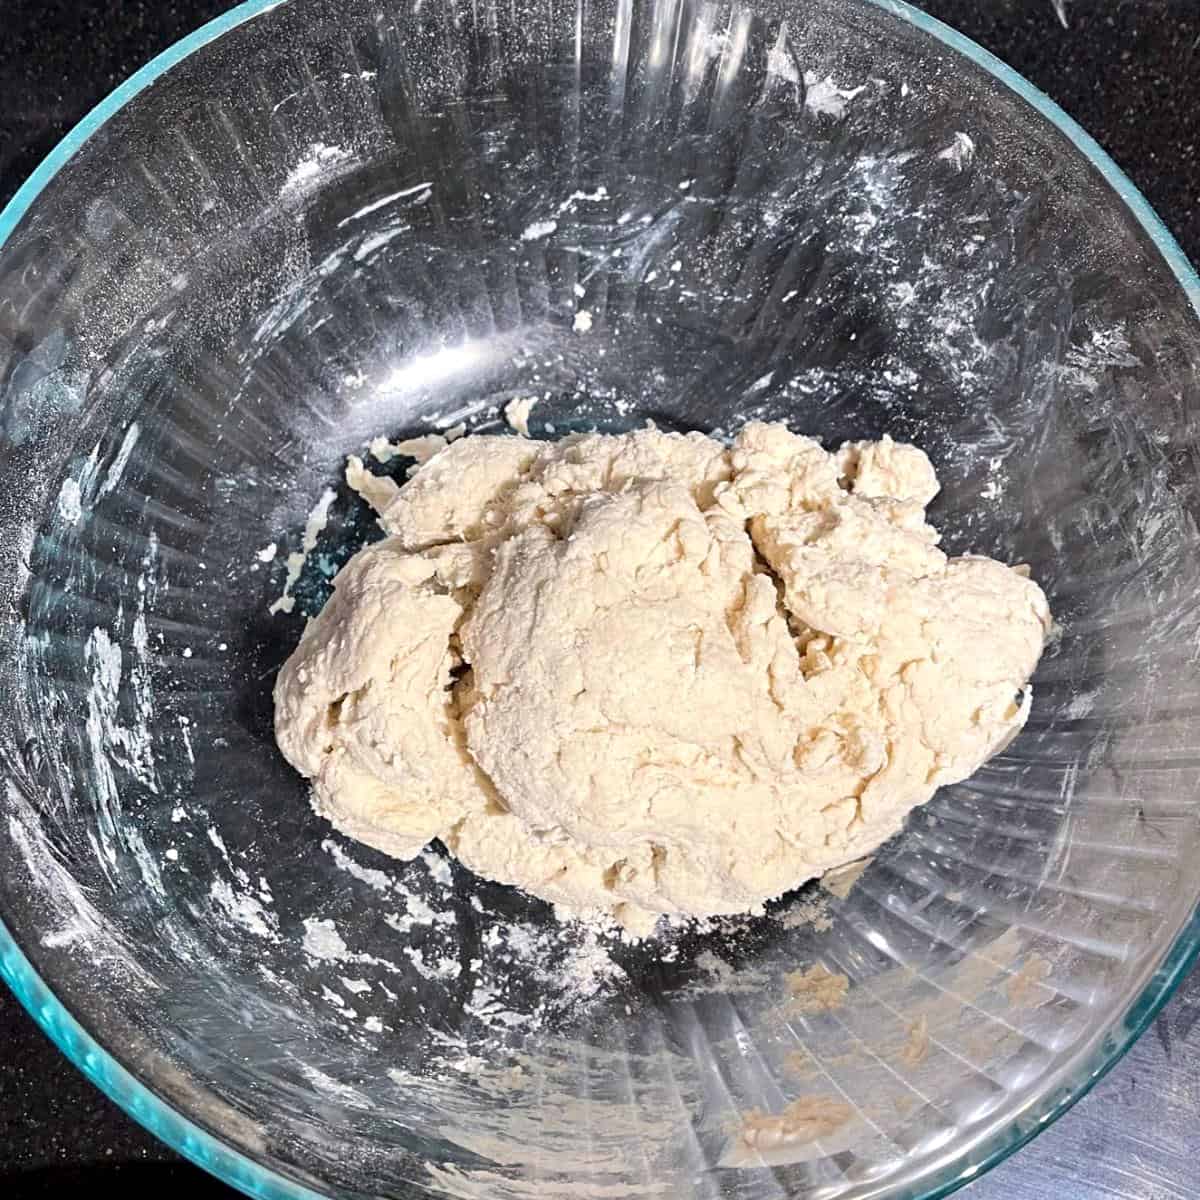 Dough formed in bowl.